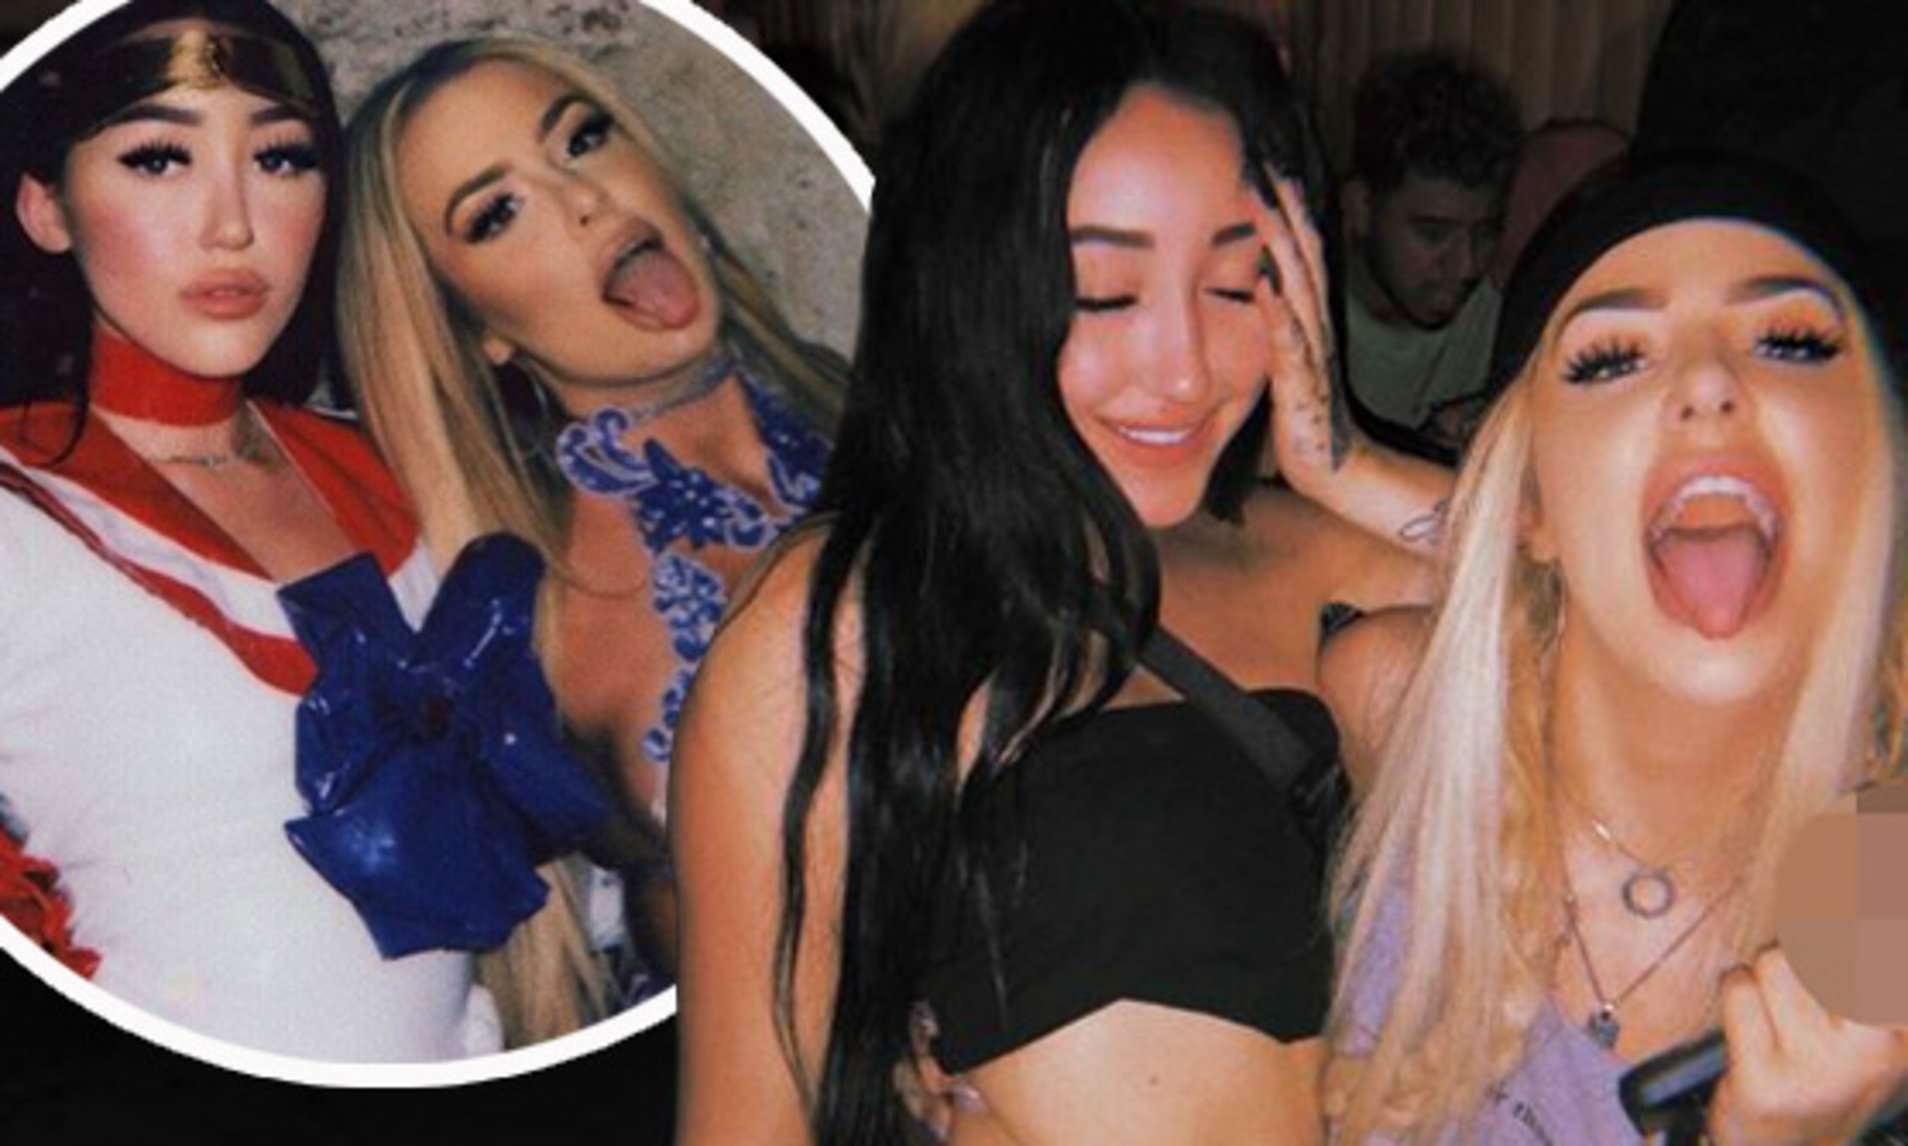 YouTube star Tana Mongeau seems to put kibosh on romance rumors with Noah Cyrus after calling Miley's sister her 'girlfriend': 'There is no tea'